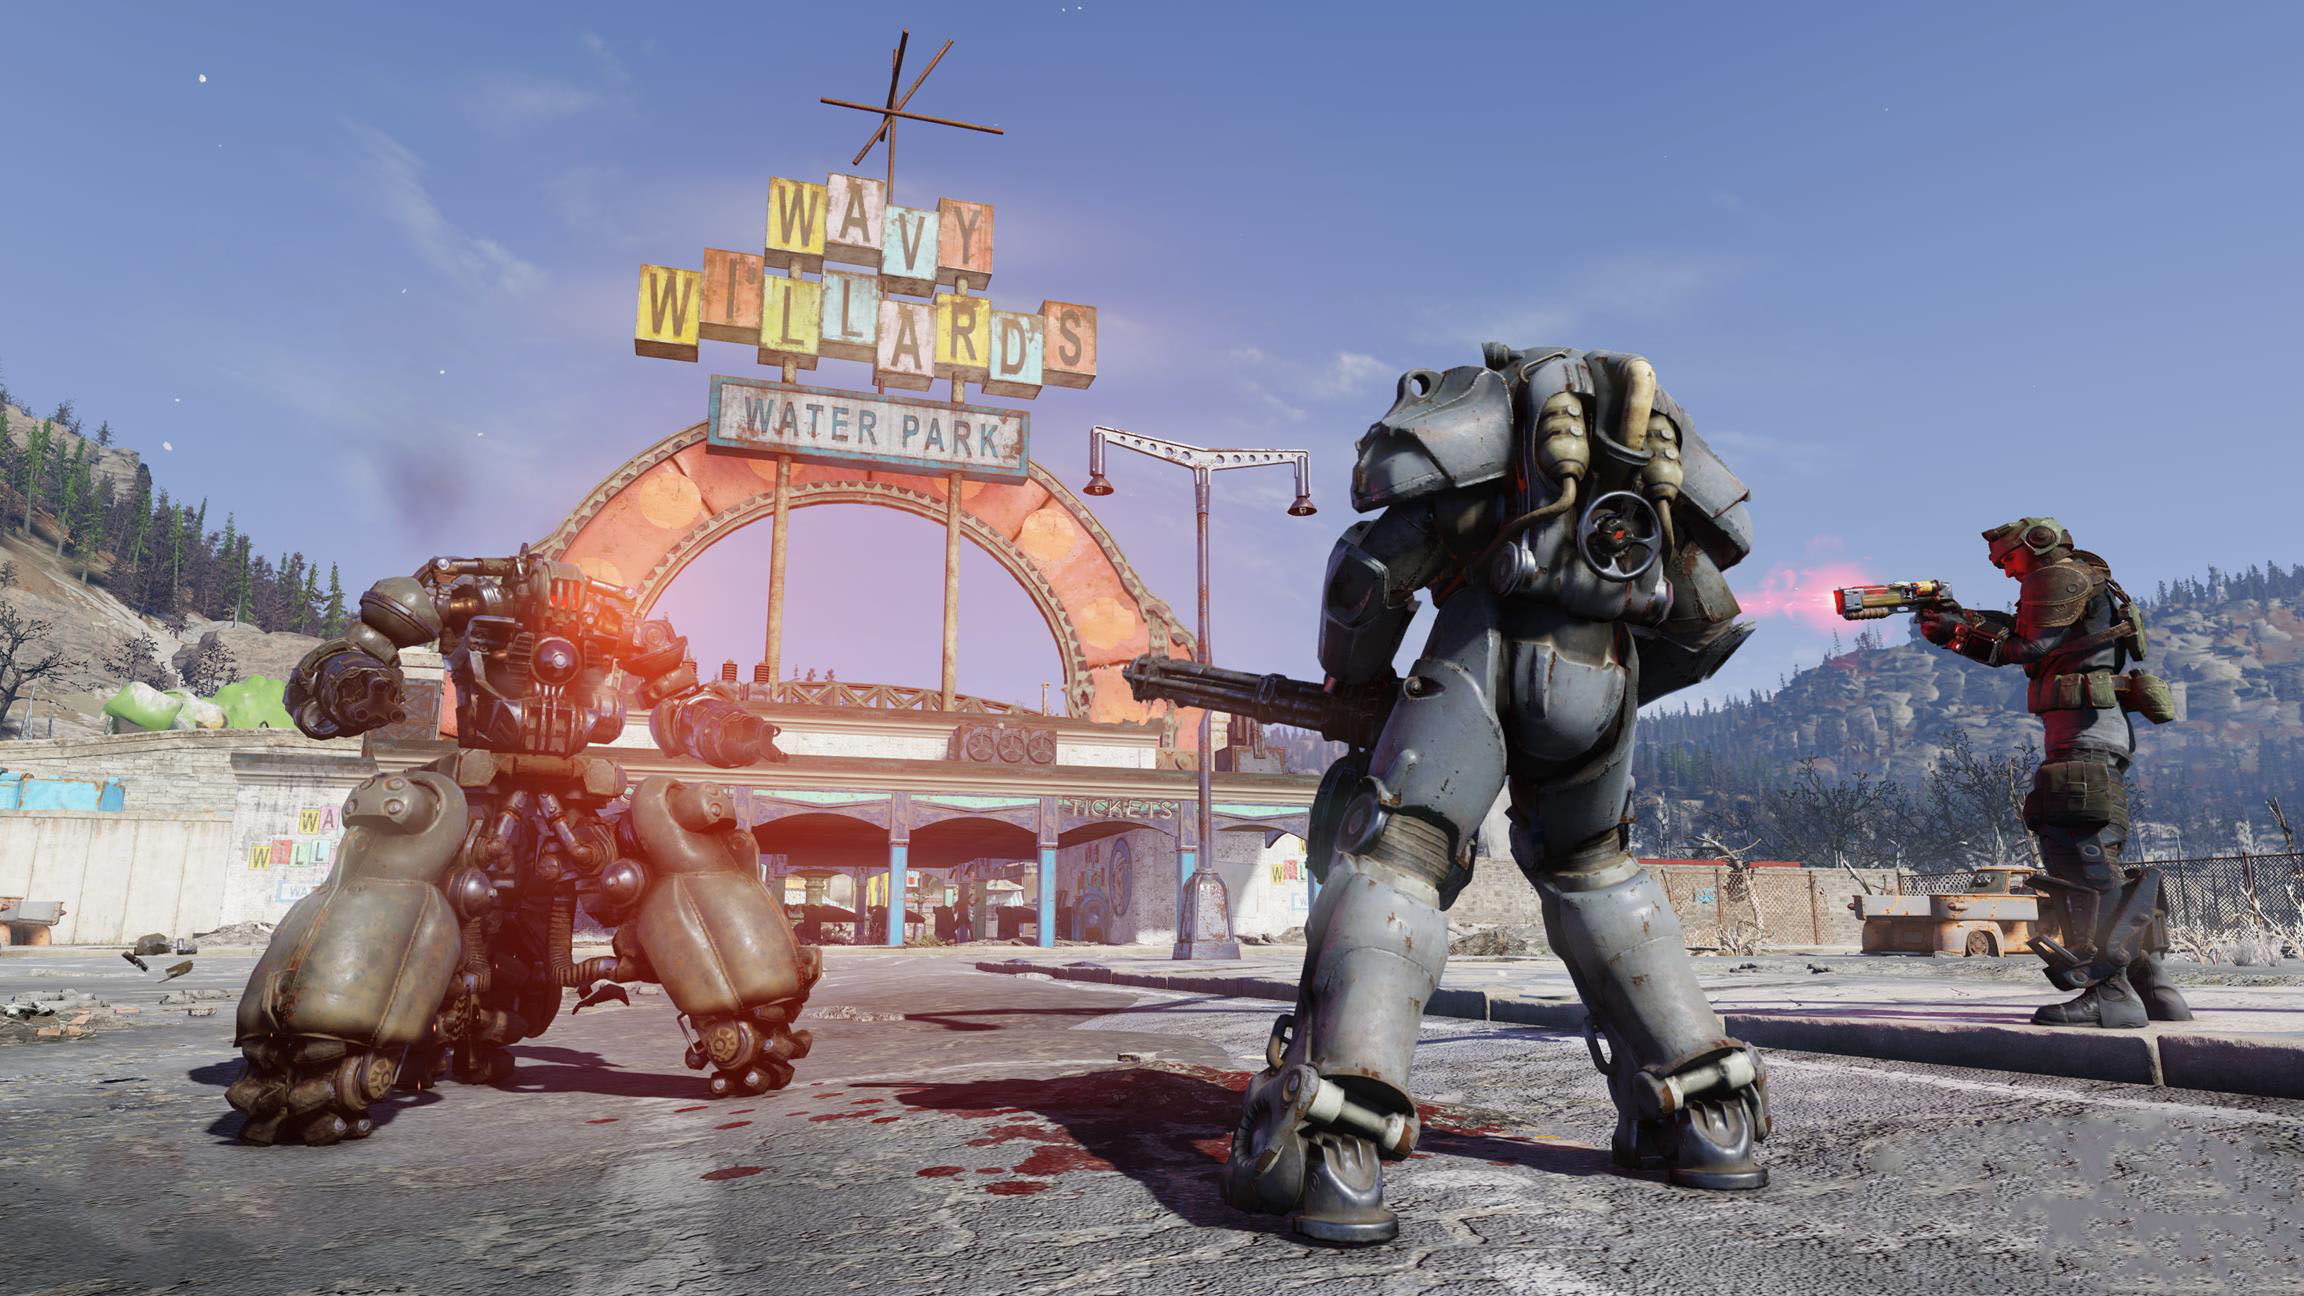 Fallout 76 Free to Existing Bethesda Players on Steam, Via Linked Accounts Prior to April 13